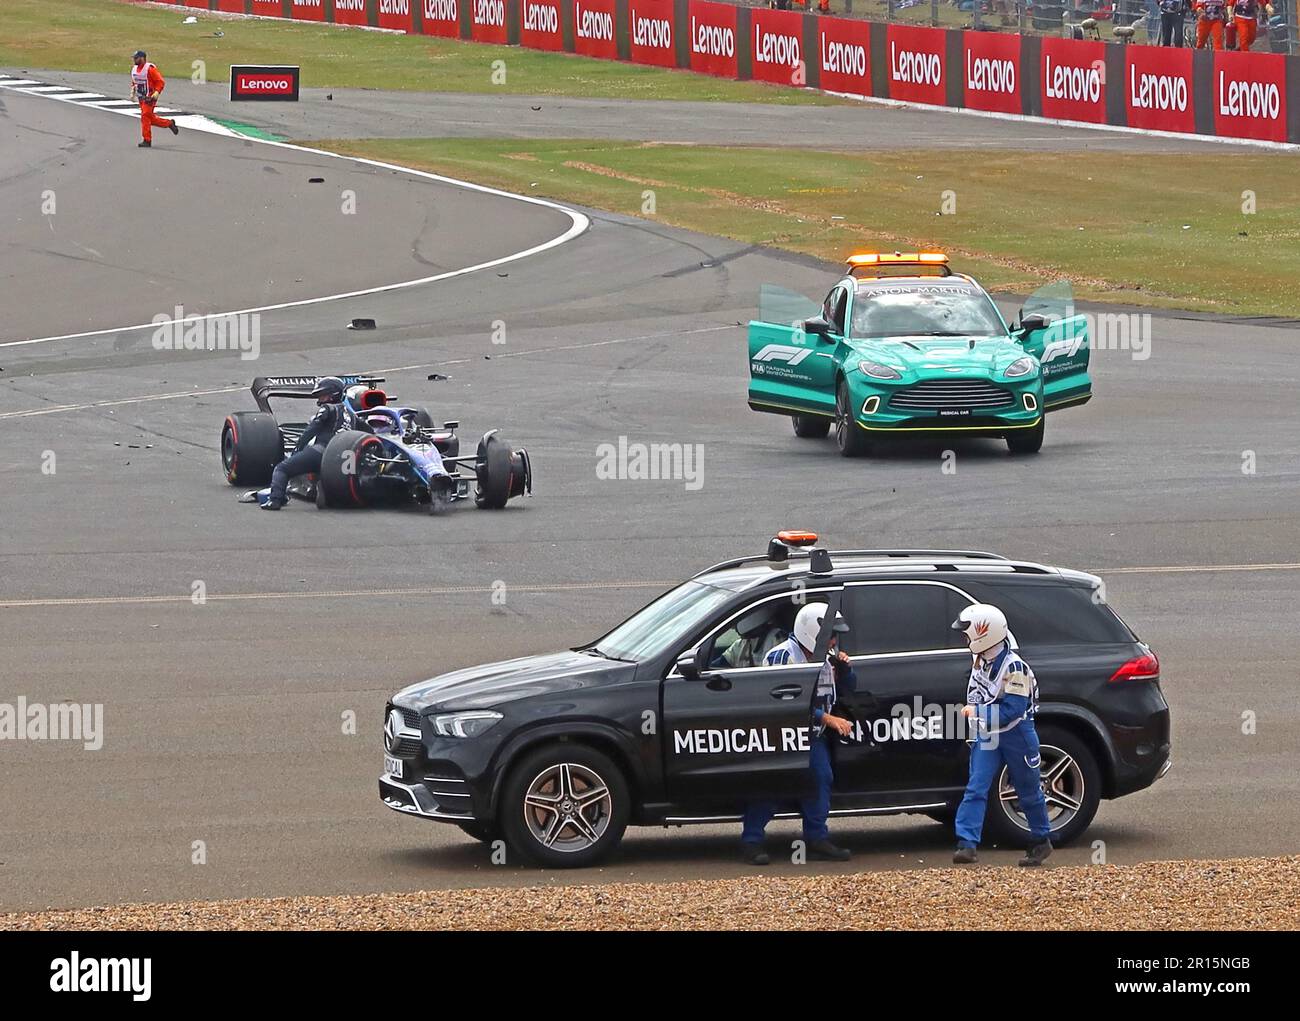 Williams Racing 23 - Alexander Albon accident at Silverstone, July 2022 Stock Photo